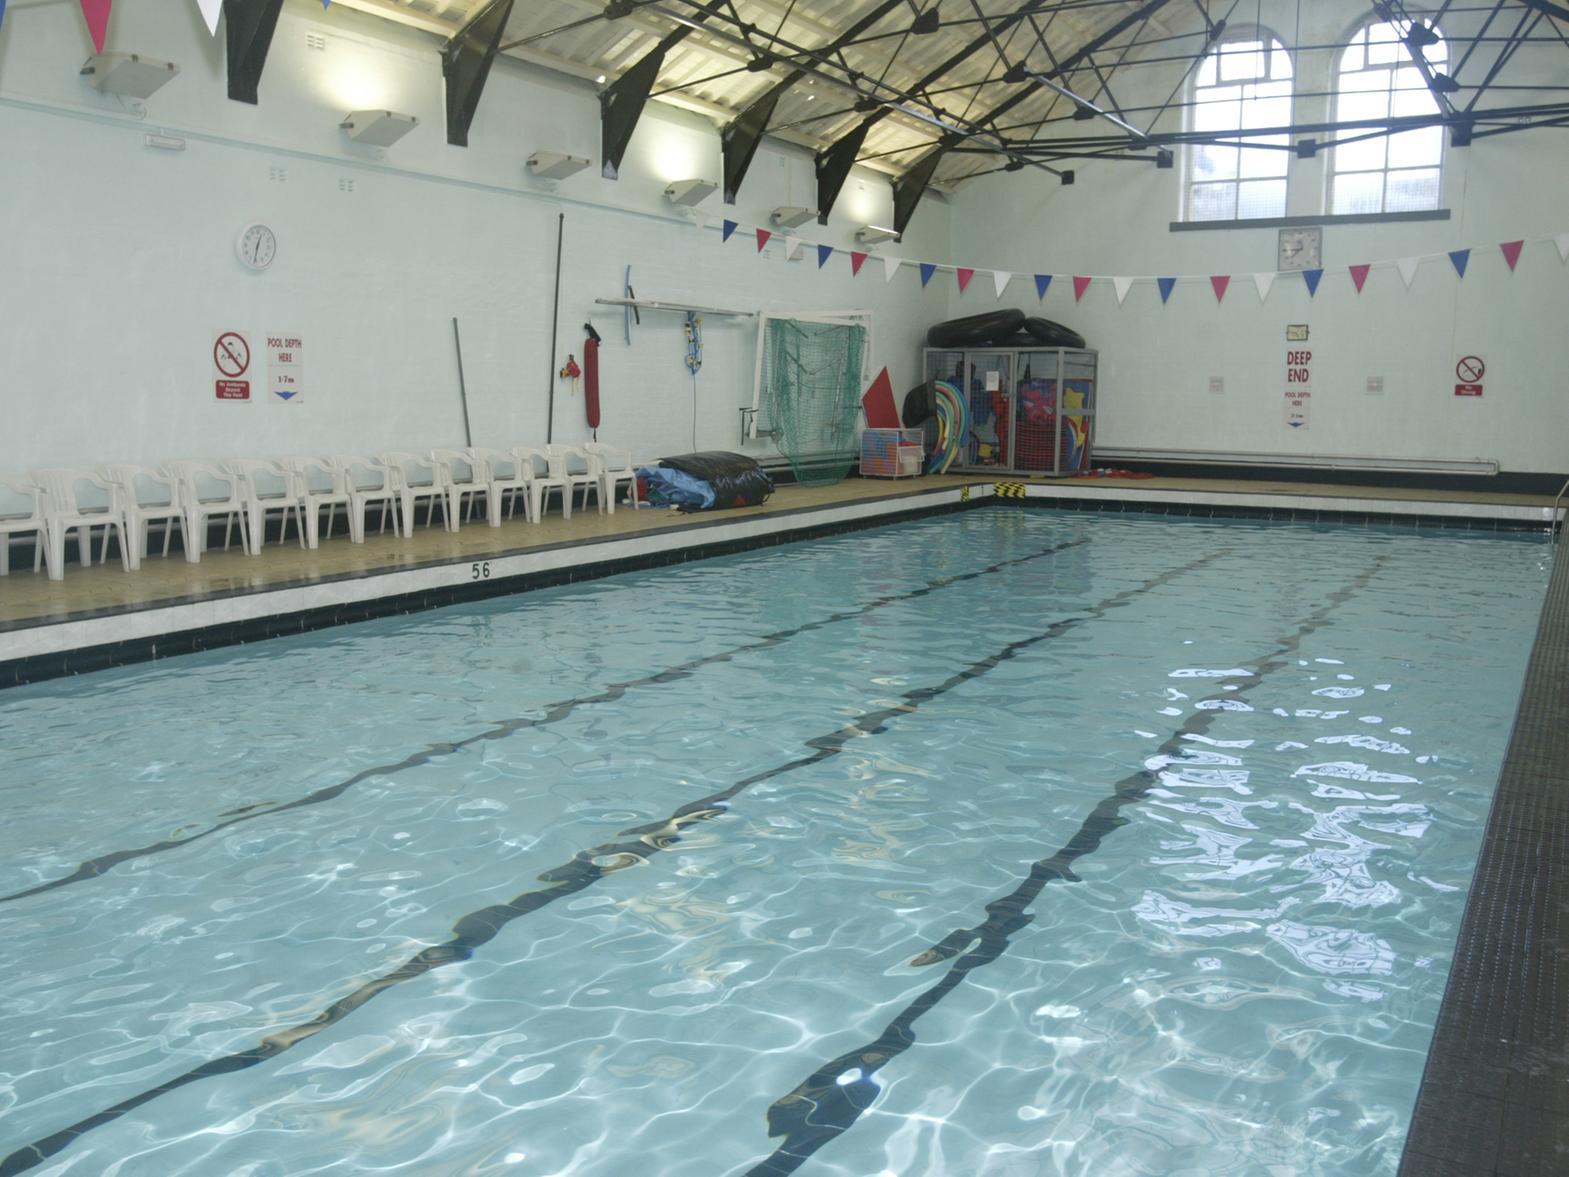 Many residents will remember swimming at Elland baths. Sadly back in 2011 the pool was closed due to structural defects and in 2014 the 110-year-old building was demolished.